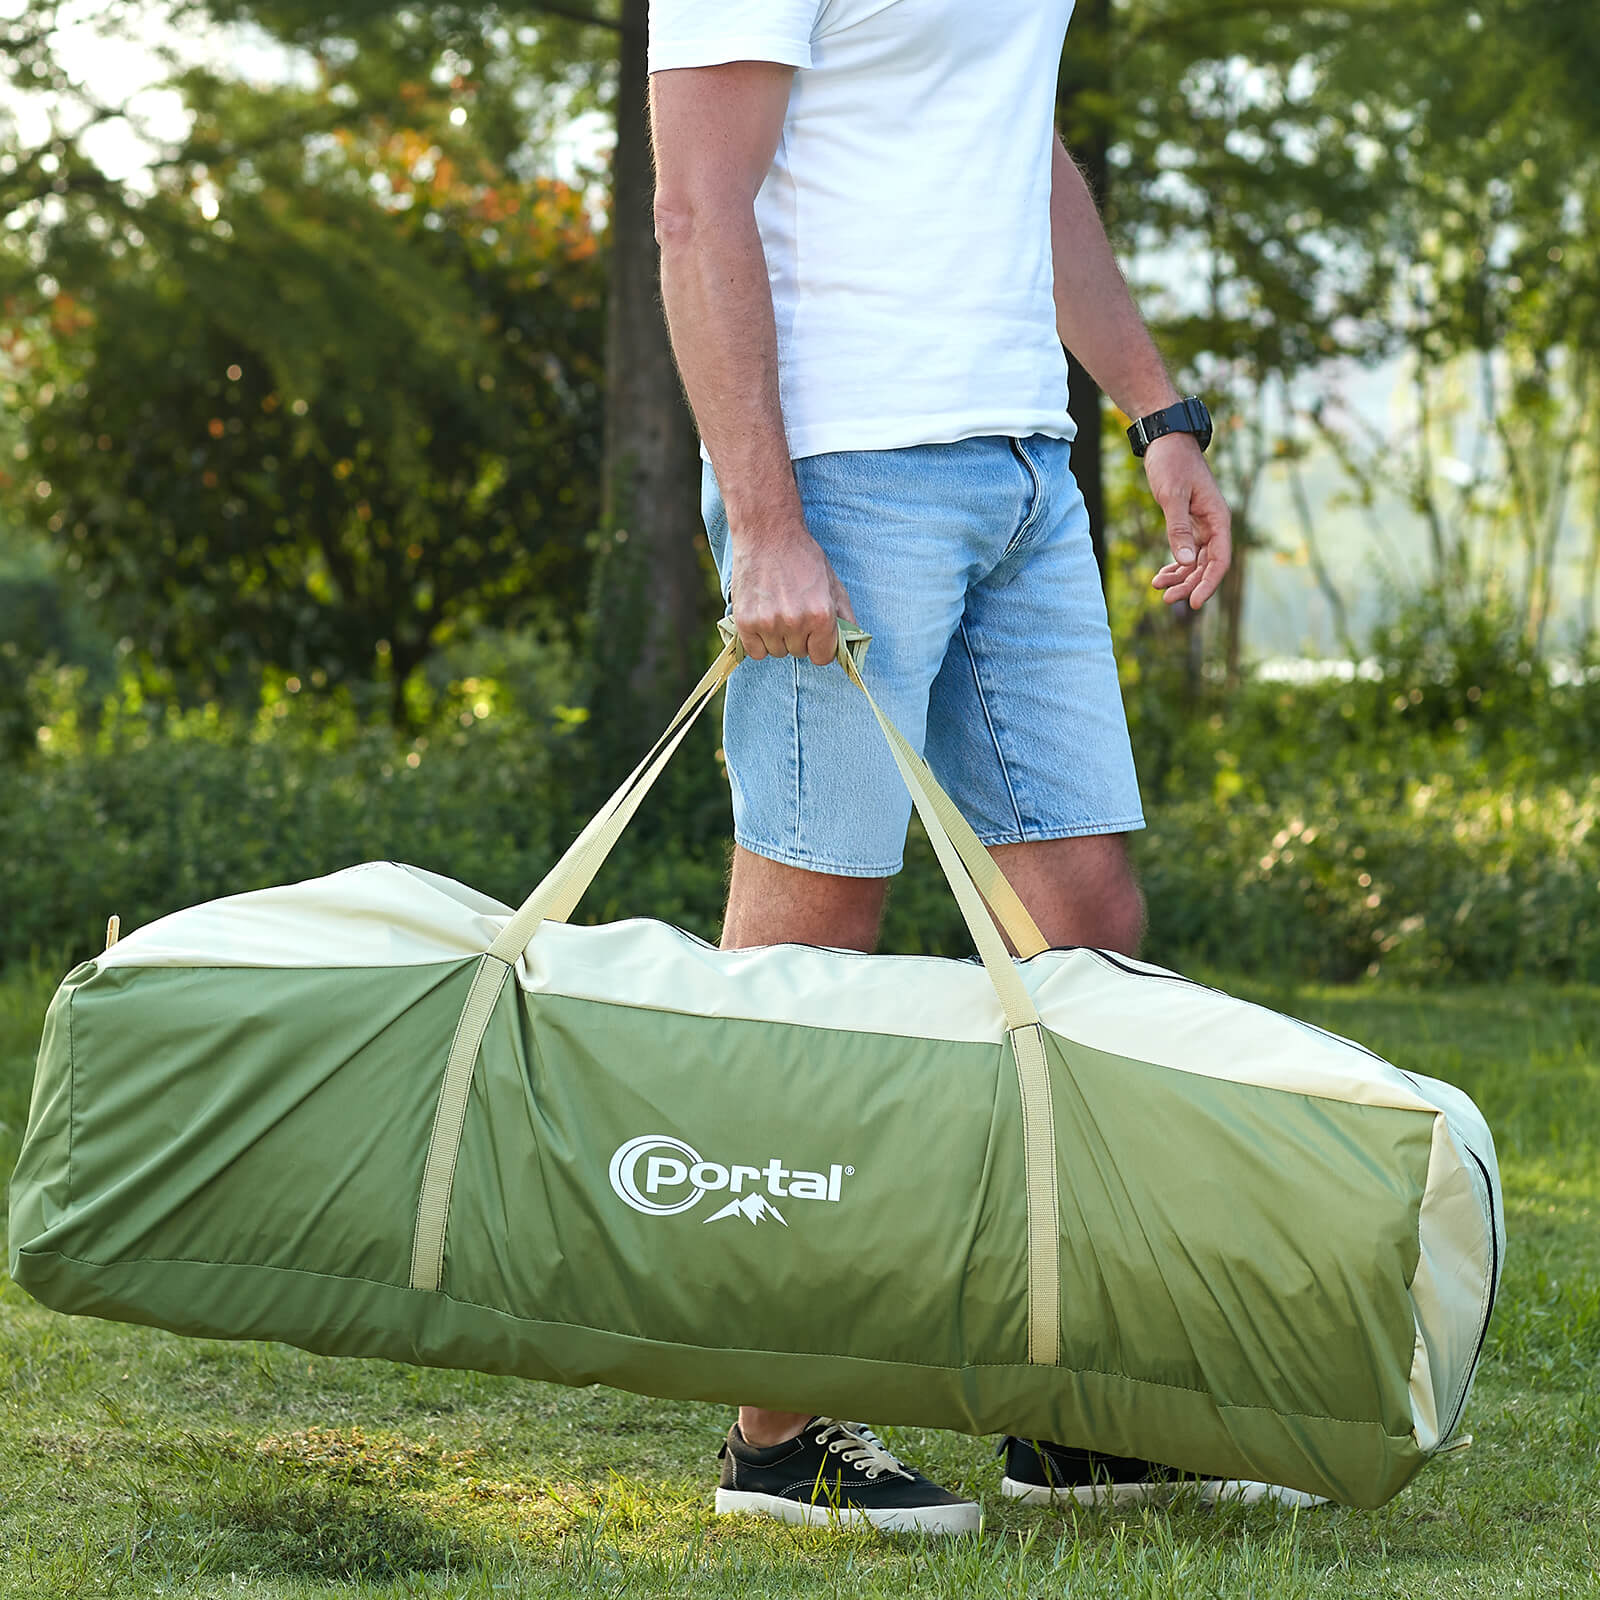 Top 5 Instant Tents for EASY Camping